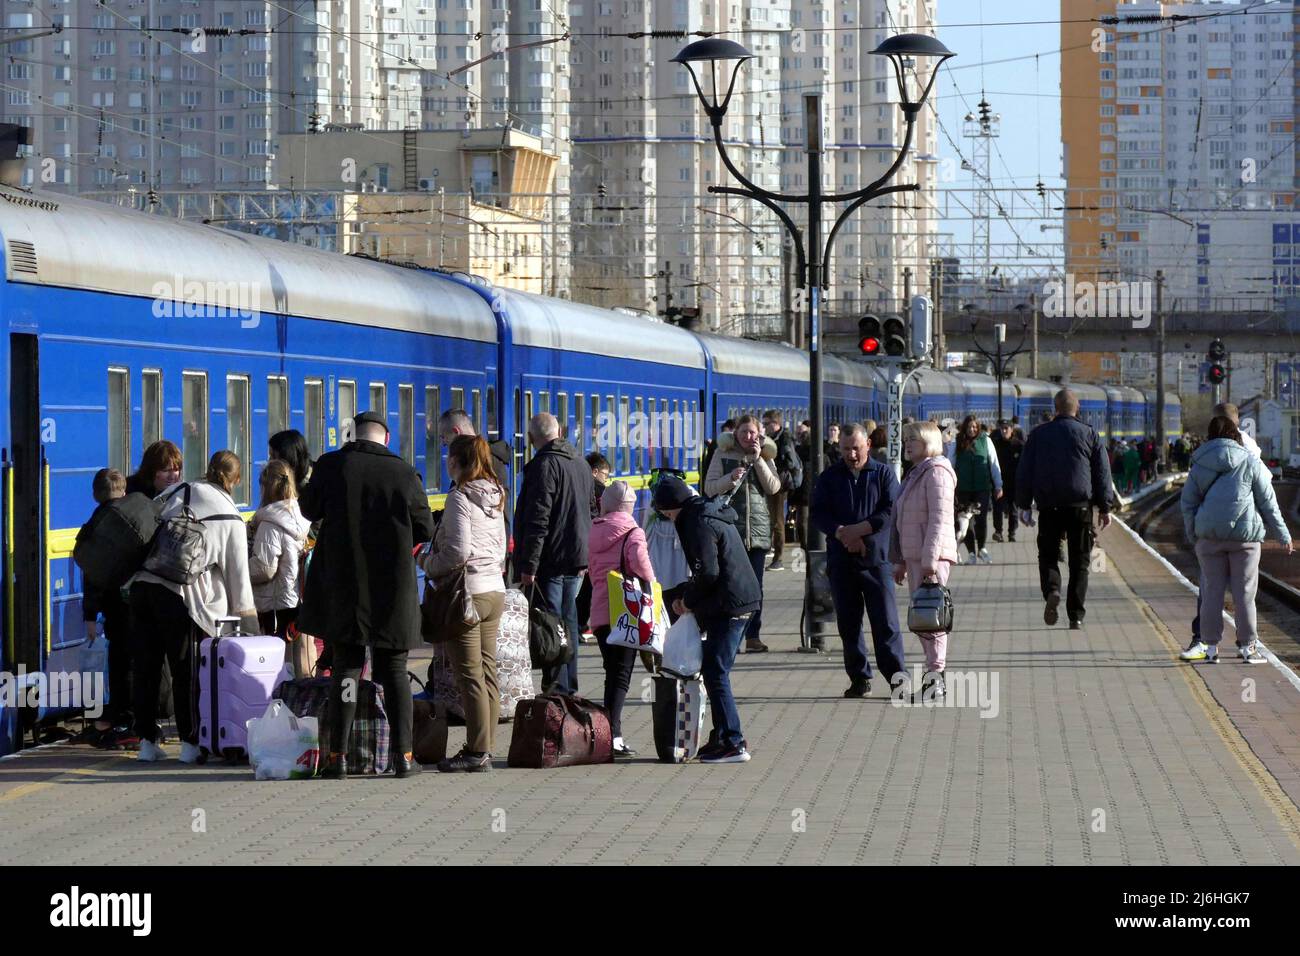 ODESA, UKRAINE - APRIL 25, 2022 - People leaving the city due to the Russian invasion stay on the platform before the departure of an evacuation train Stock Photo